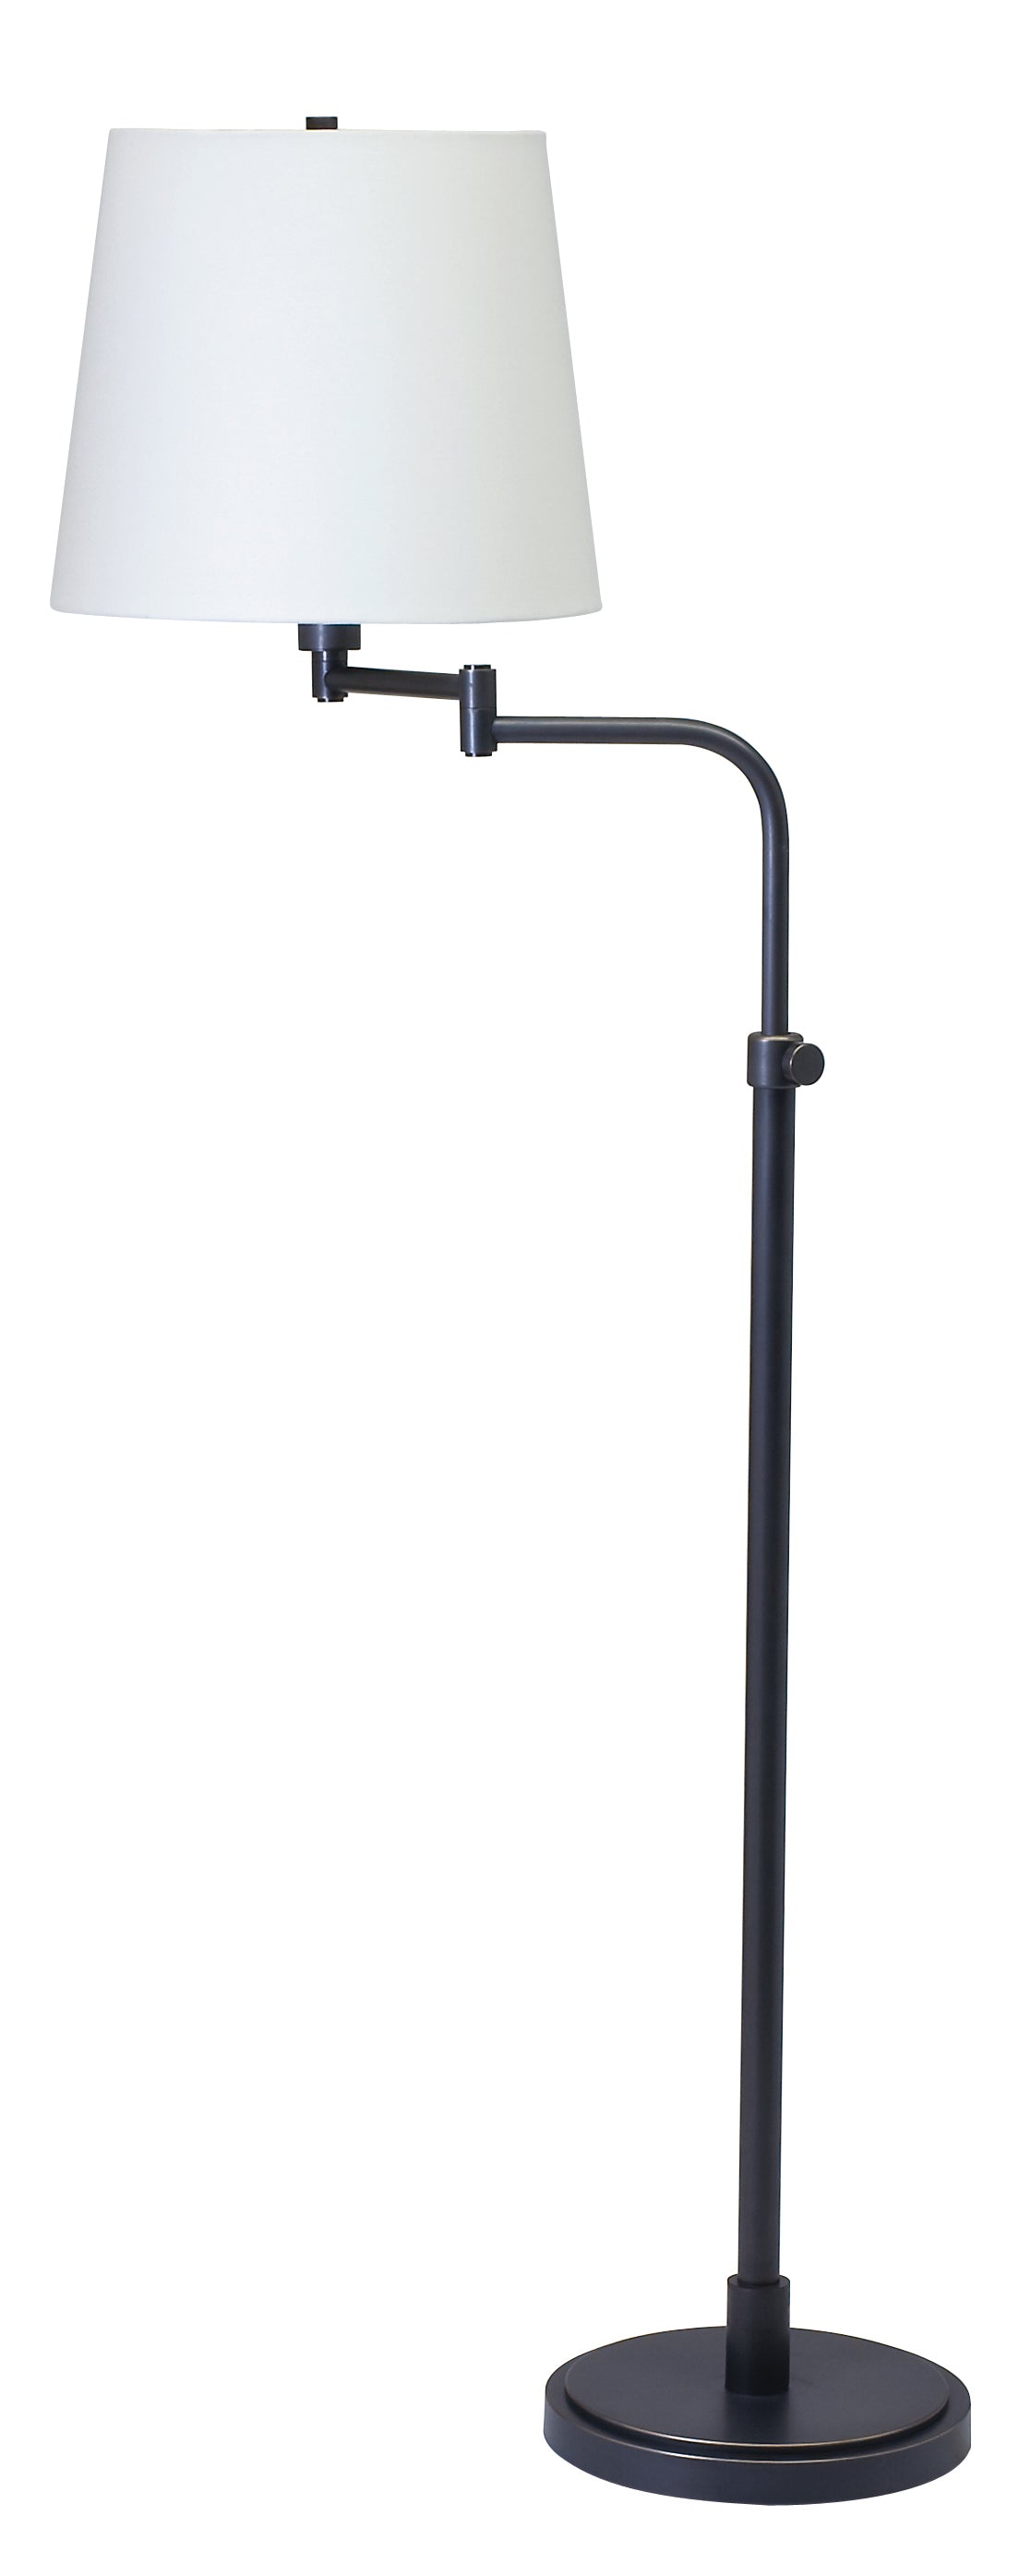 House of Troy Townhouse Adjustable Swing Arm Floor Lamp Oil Rubbed Bronze TH700-OB